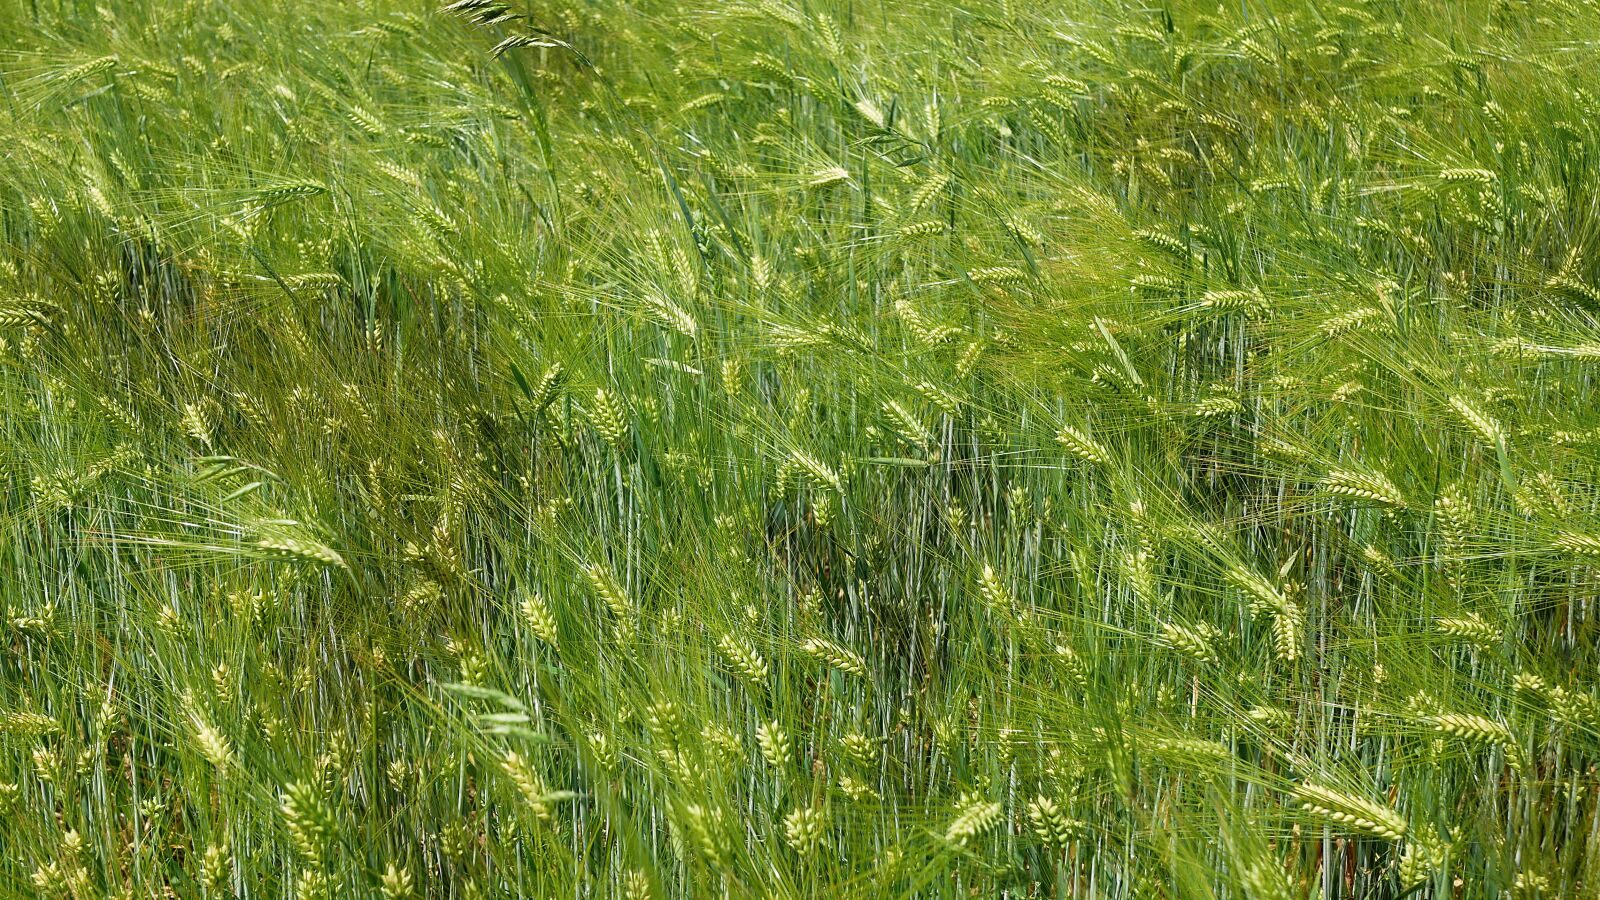 Panasonic Lumix DMC-GX85 (Lumix DMC-GX80 / Lumix DMC-GX7 Mark II) sample photo. Crops, agriculture, fields photography